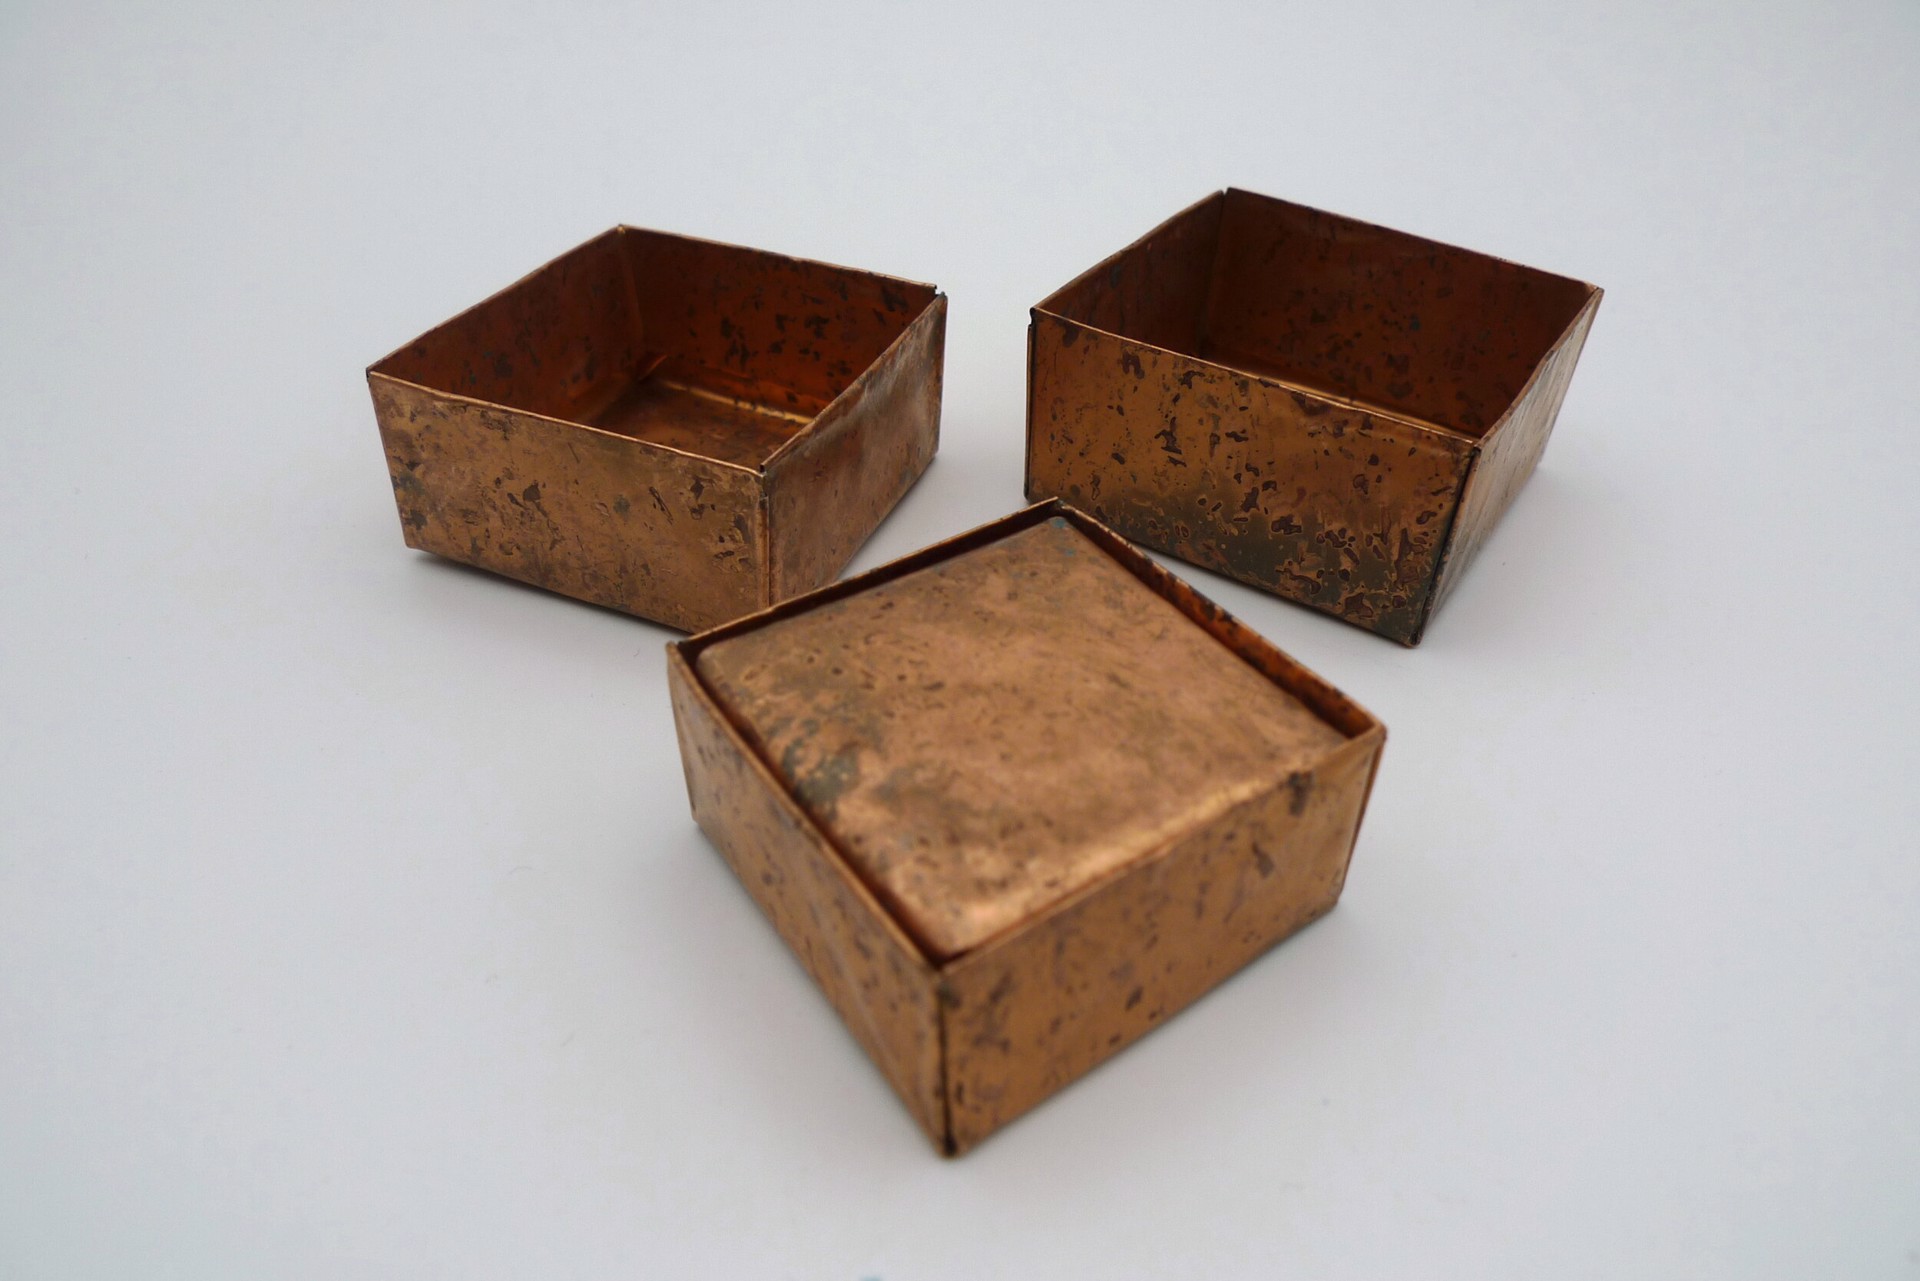 Origami Nesting Boxes by Erica Schlueter